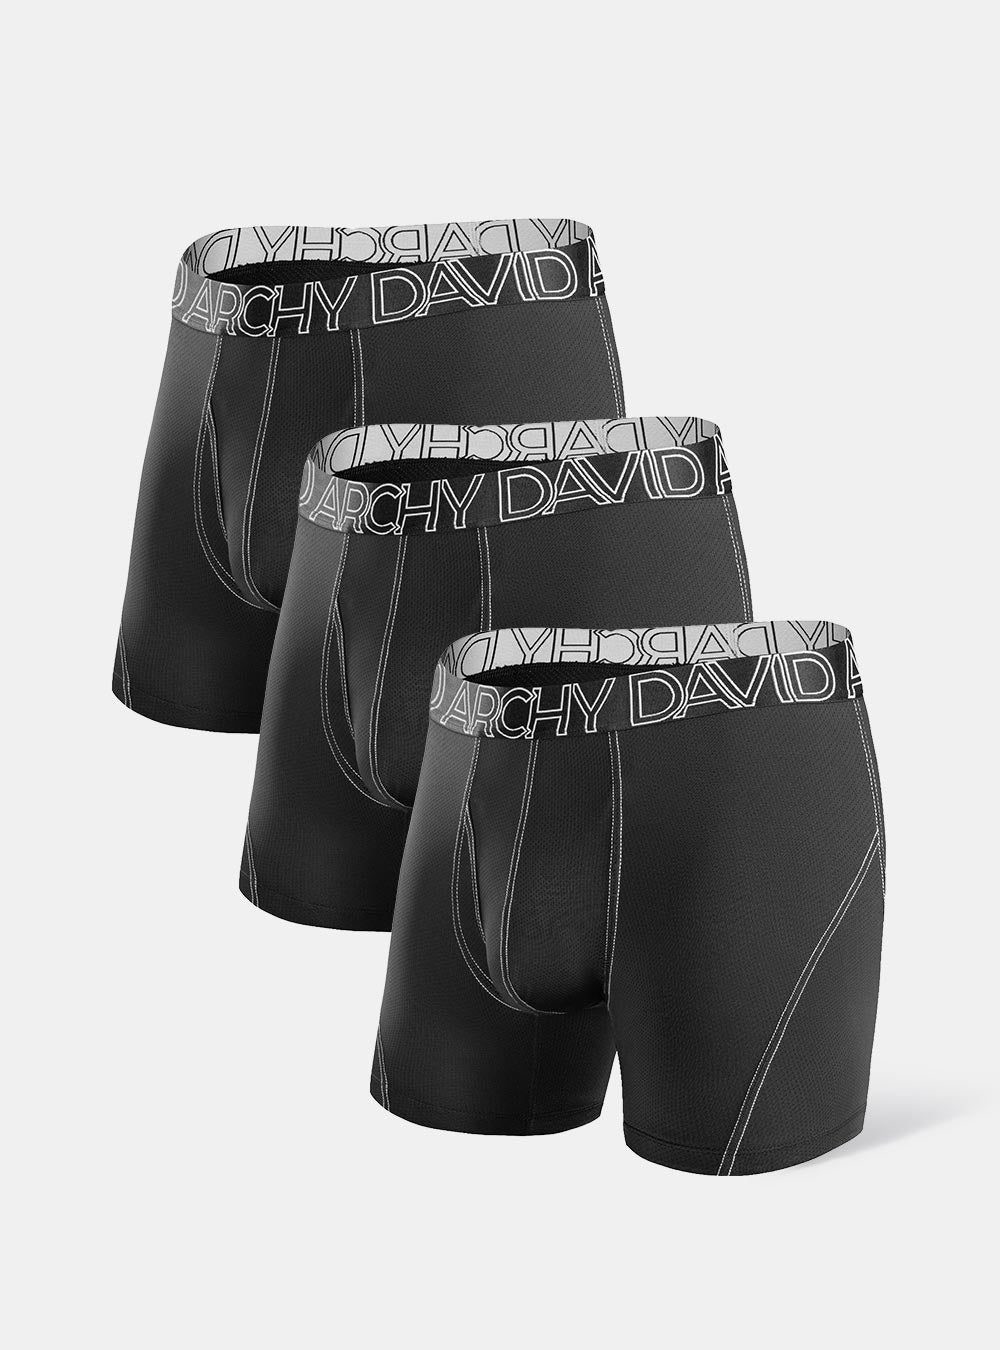 3 Packs Quick Dry Sports Boxer Briefs